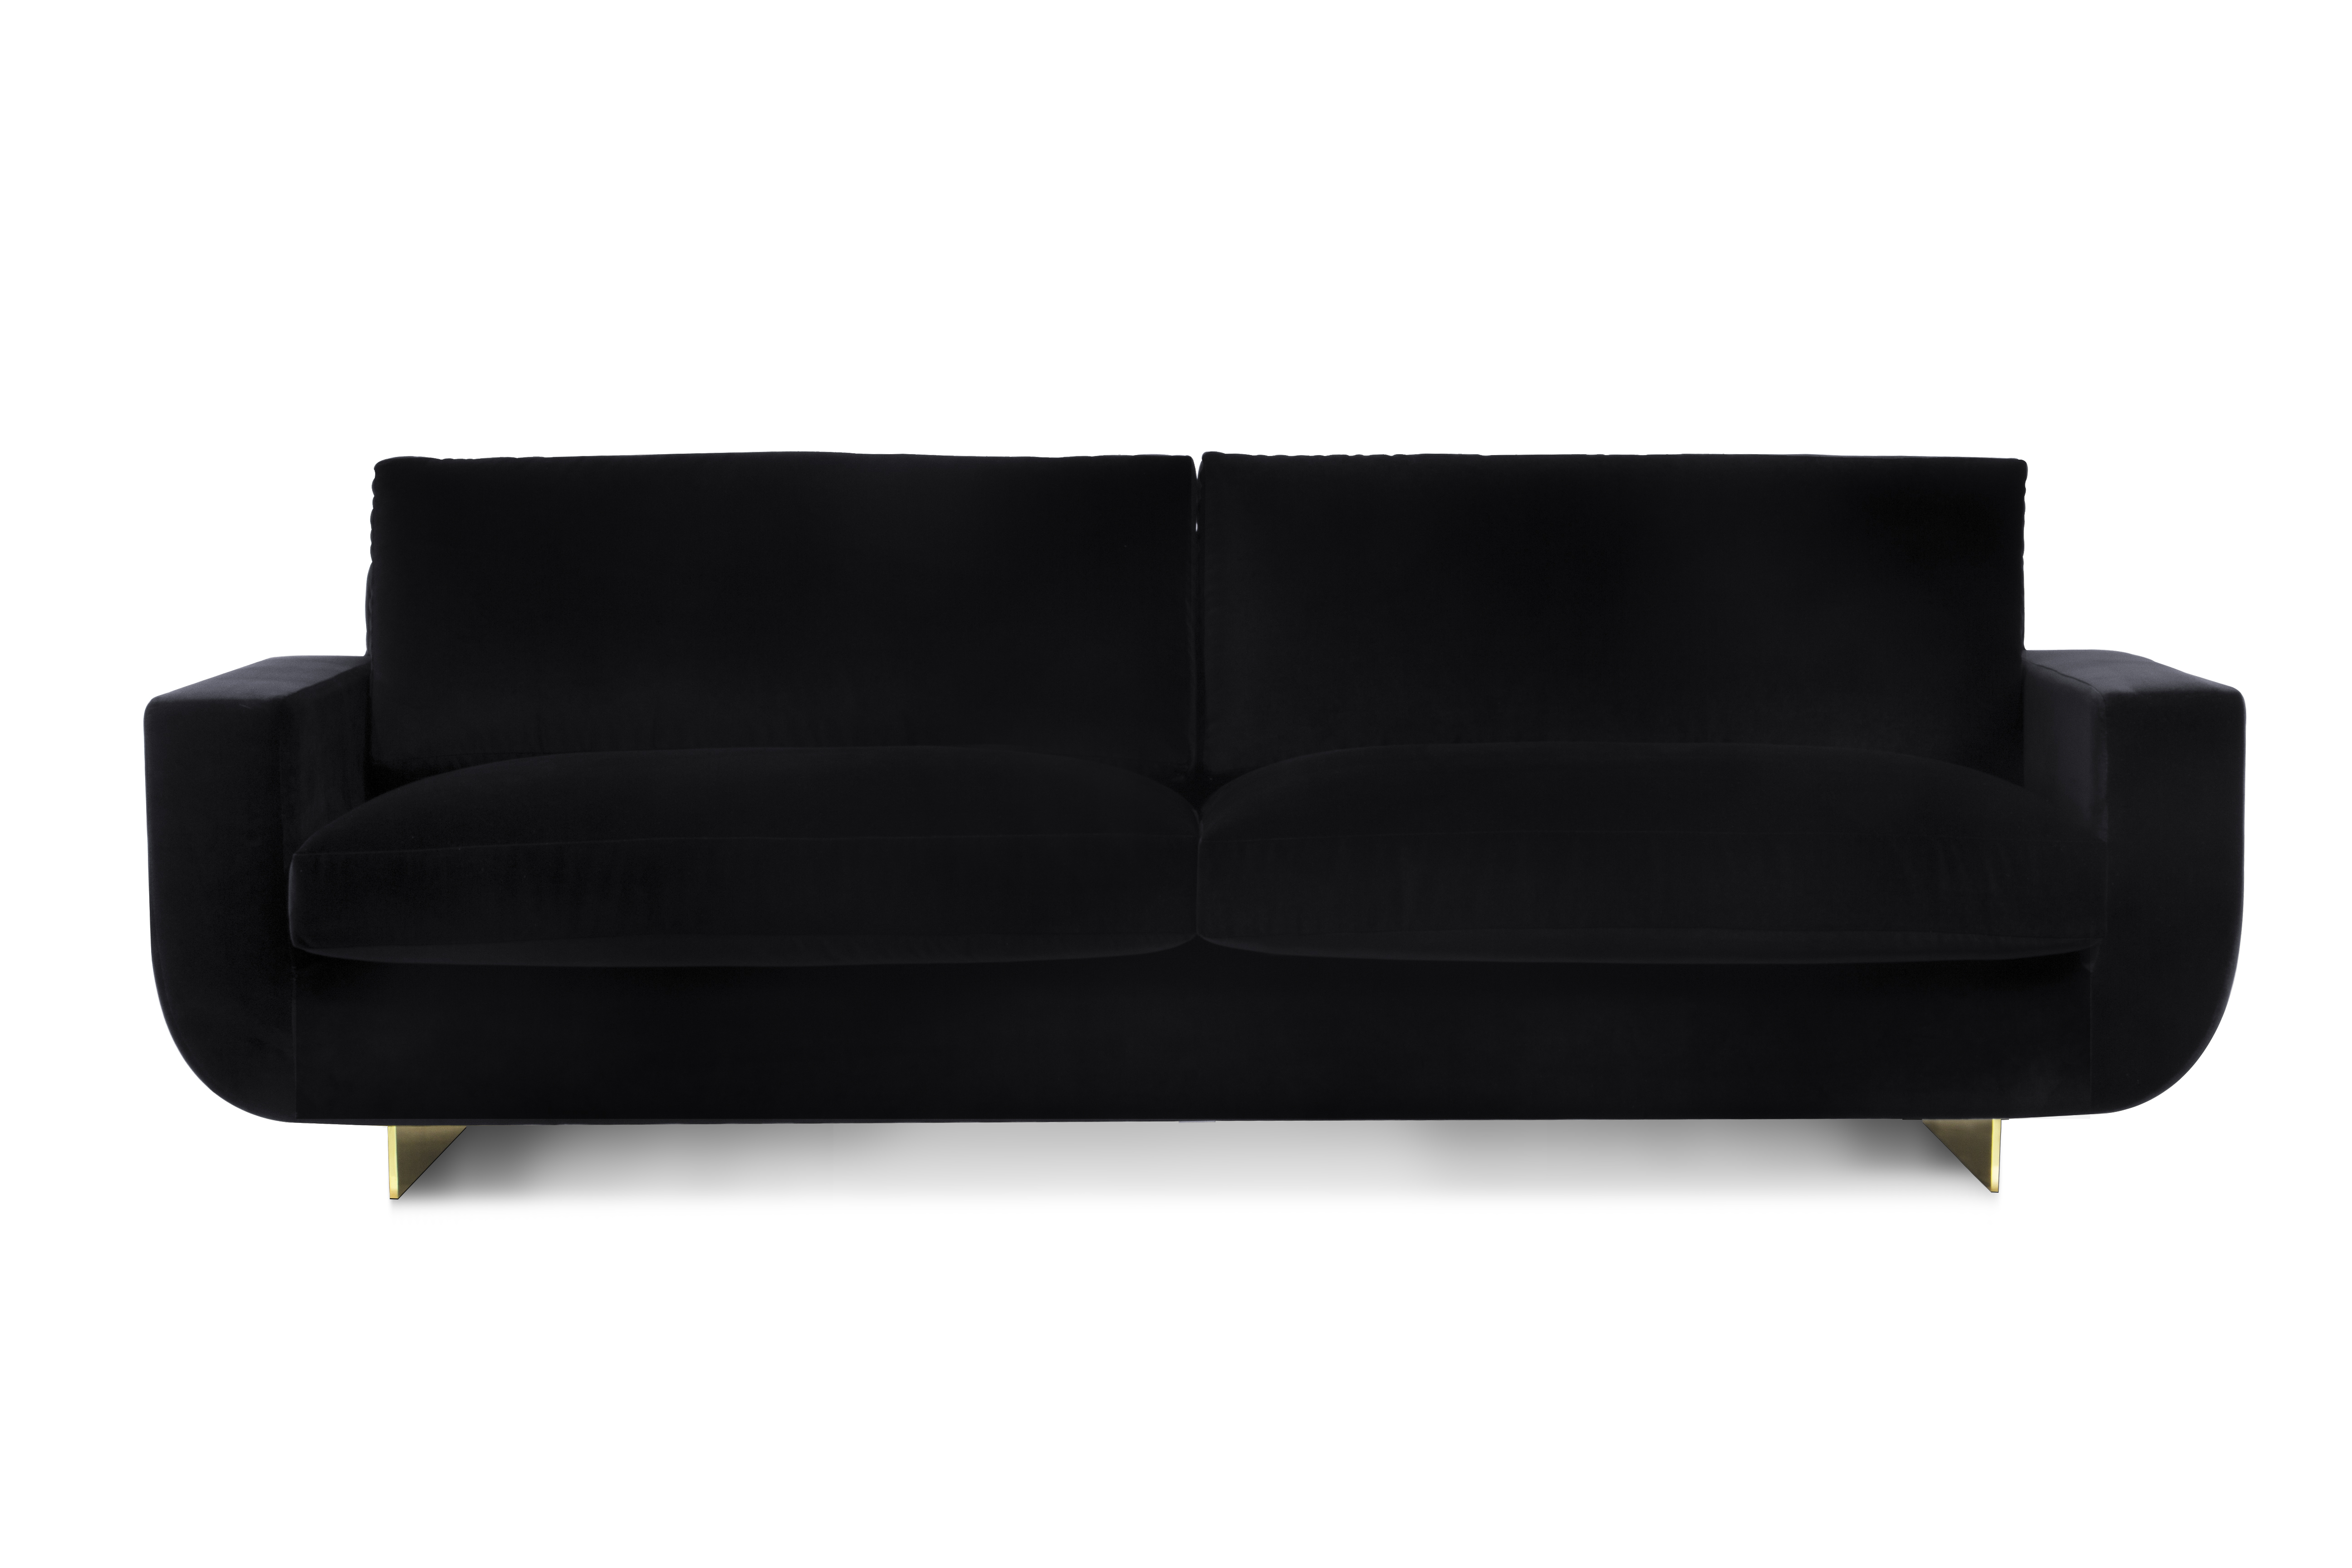 The Trendiest Sofas to have in your Living Room Décor